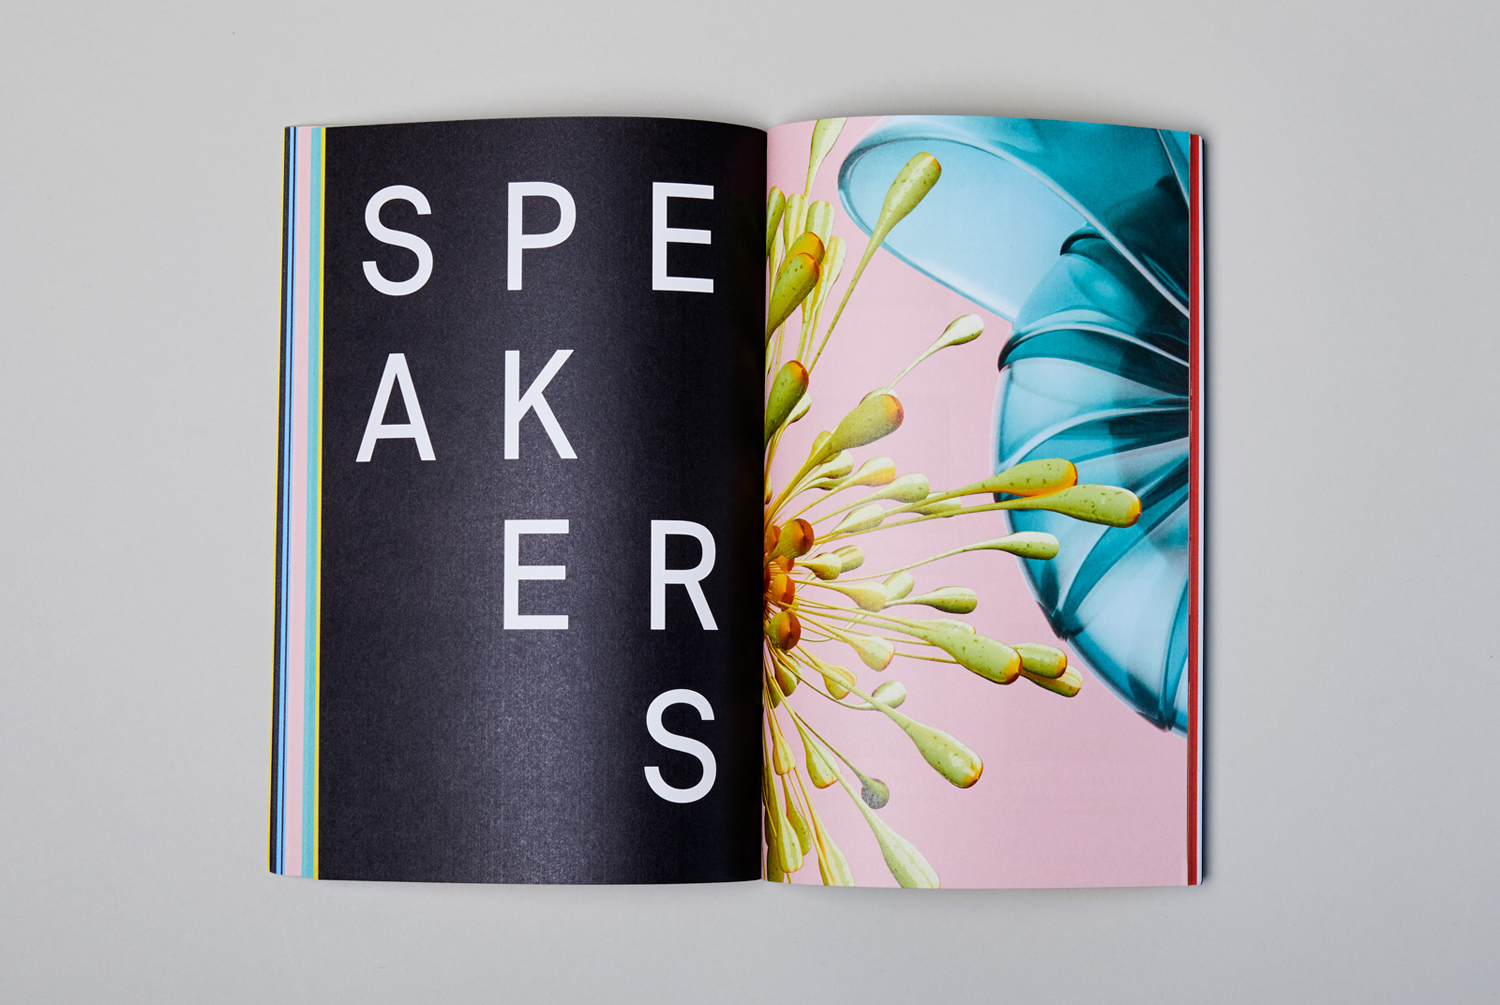 Posters, programme, and brand identity system by New York based Mother Design for the AIGA Design Conference